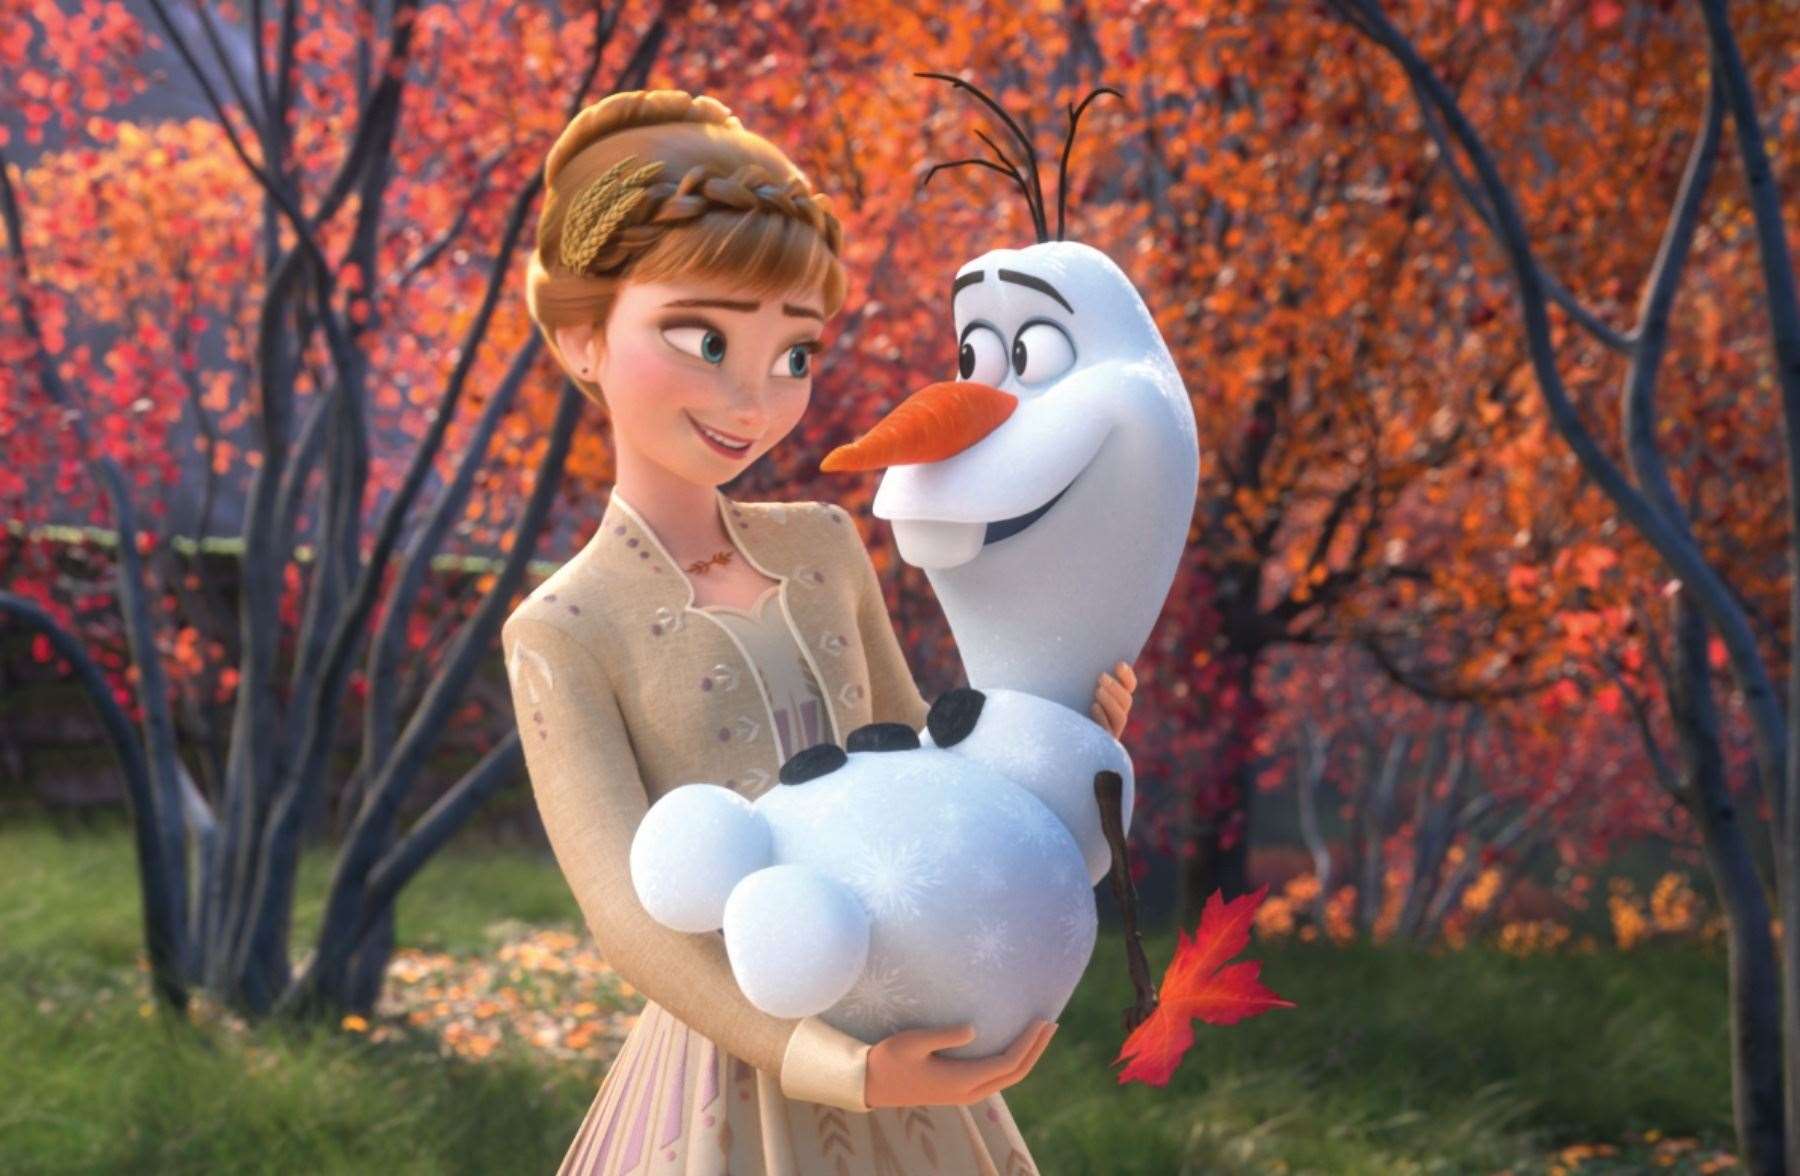 In Frozen 2 Olaf sings “Some Things Never Change,” but has now written a new song to mark the global shutdown. © 2019 Disney. All Rights Reserved.